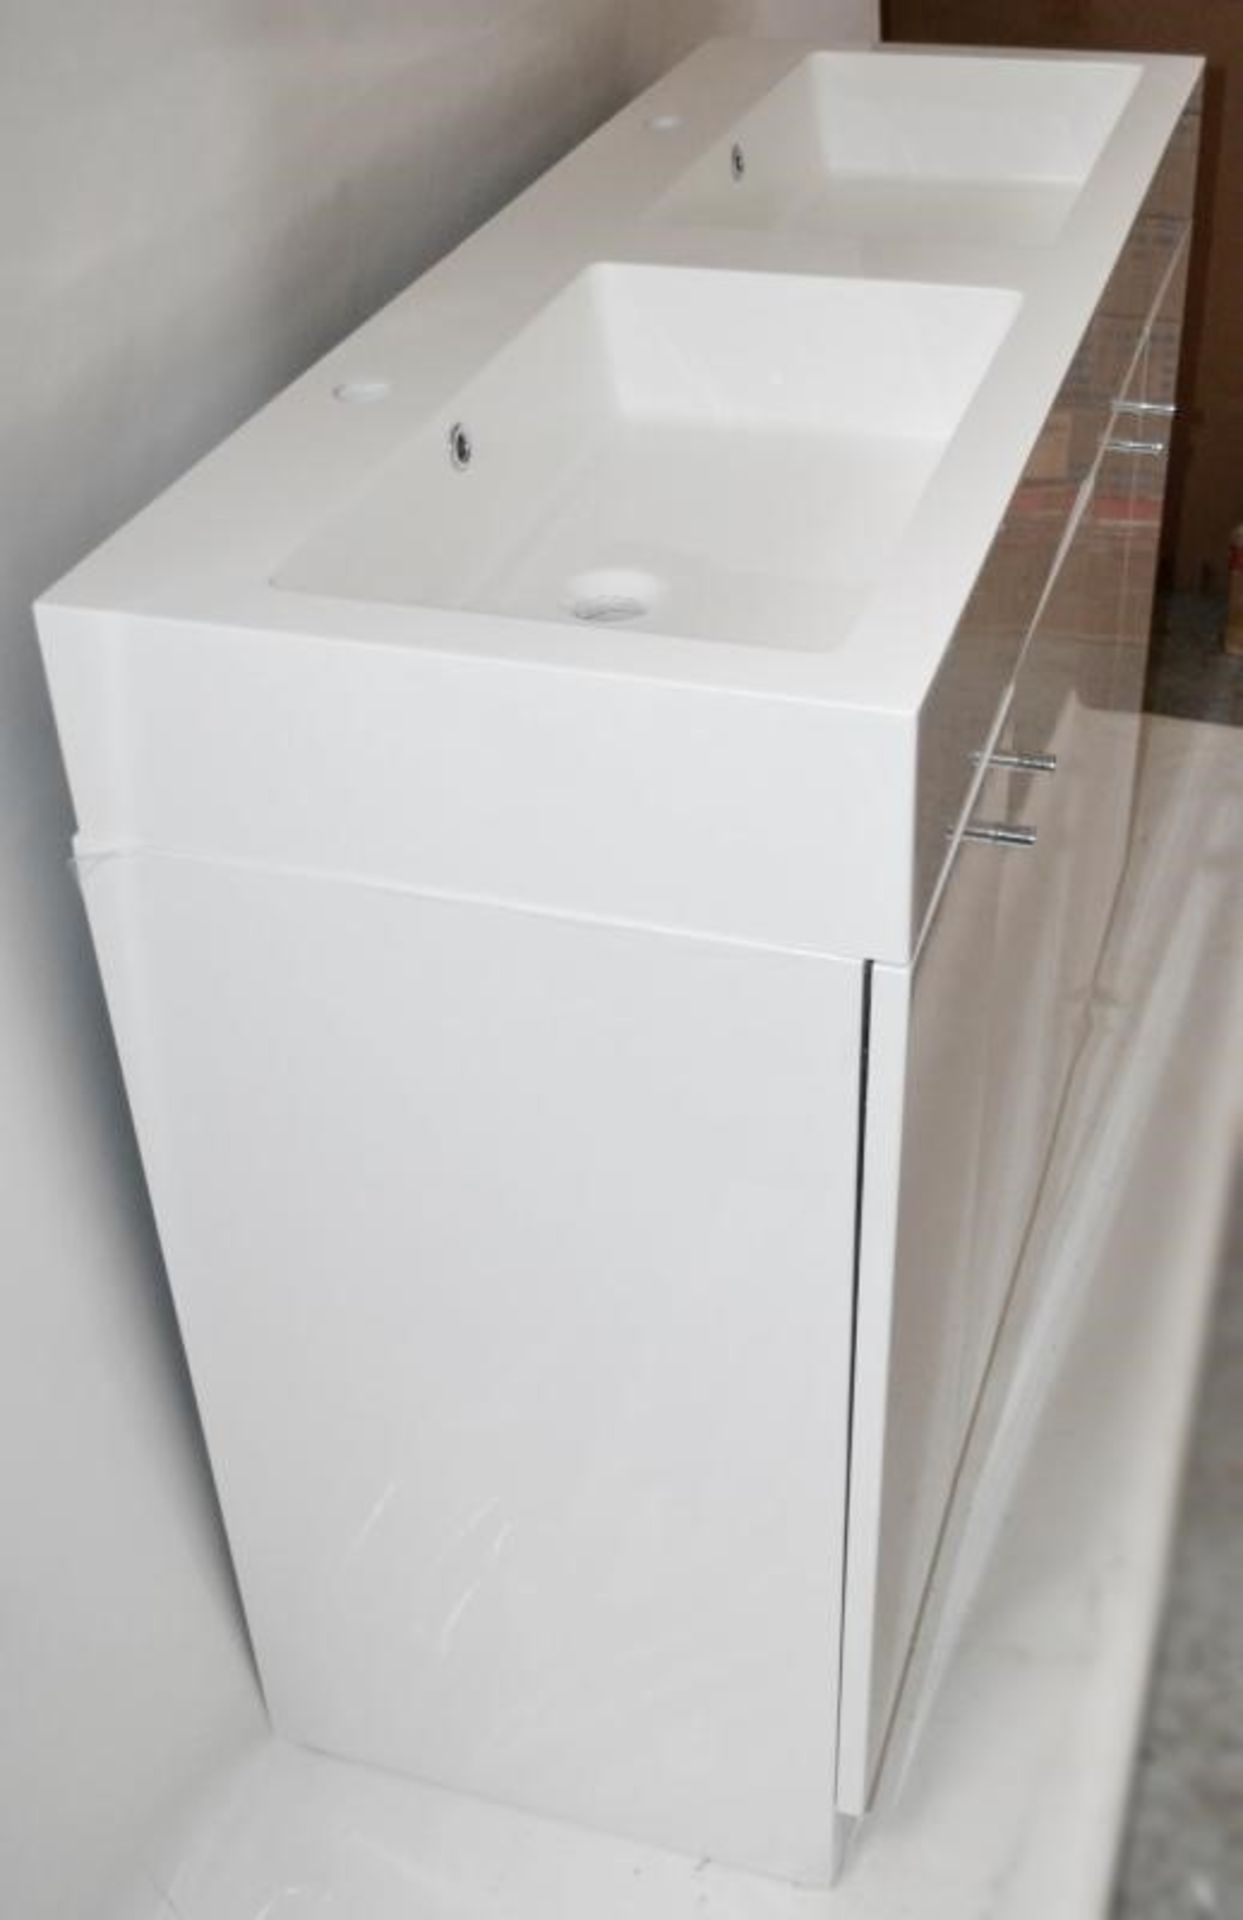 1 x Gloss White 1200mm 4-Door Double Basin Freestanding Bathroom Cabinet - New & Boxed Stock - CL307 - Image 3 of 6